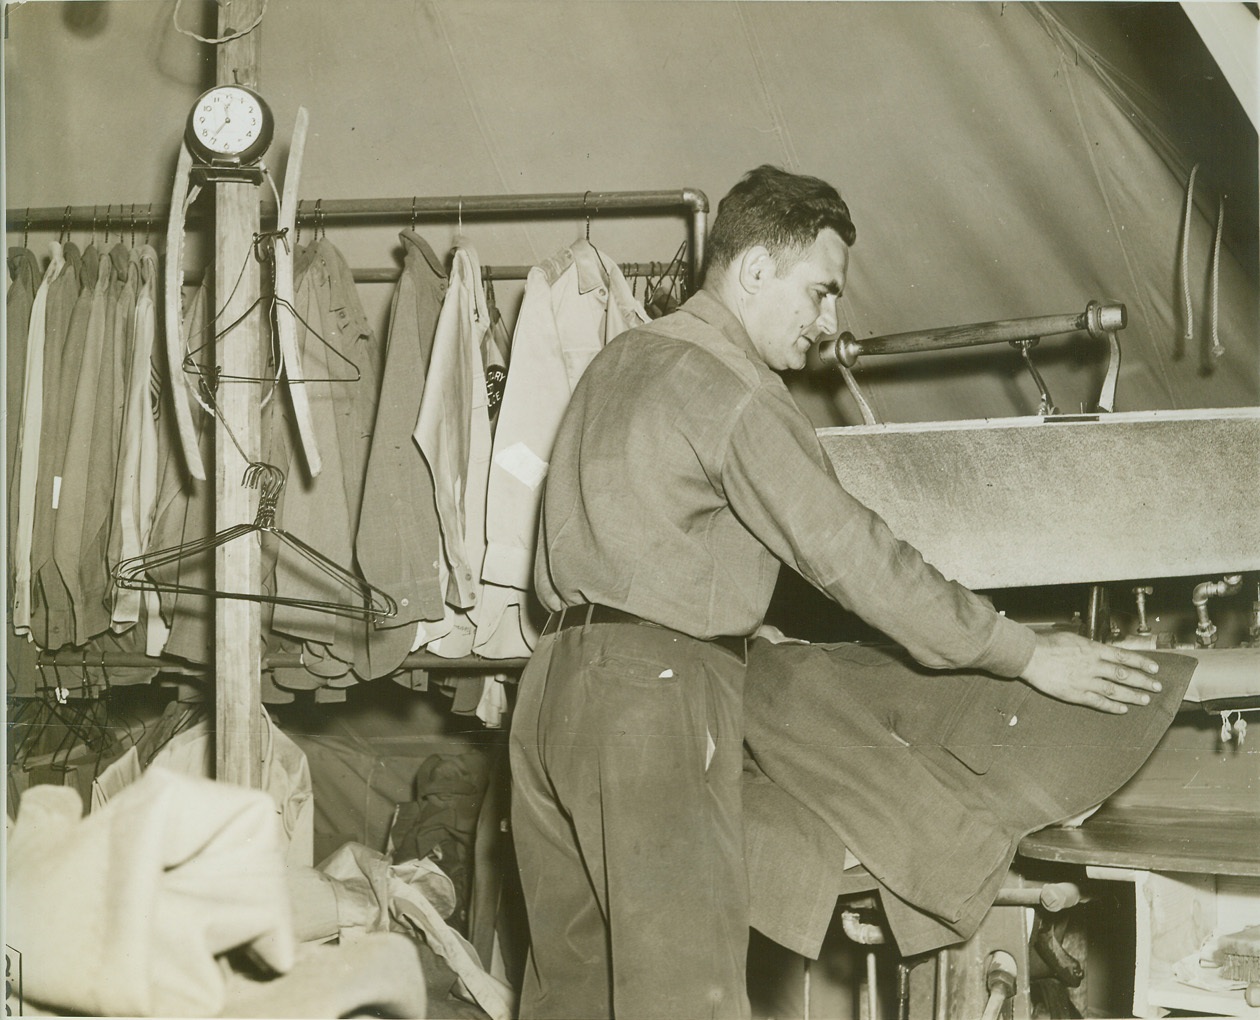 FIELD TAILOR SHOP, 10/26/1942. MANESS, N.C. – Irving Levinson, a tailor by trade, keeps in trim caring for special troops of the 26th Division. His new shop is a tent in the camp area. Here, the New Yorker does some pressing. A kerosene fired steam boiler operates the presser. Credit: OWI Radiophoto from ACME;